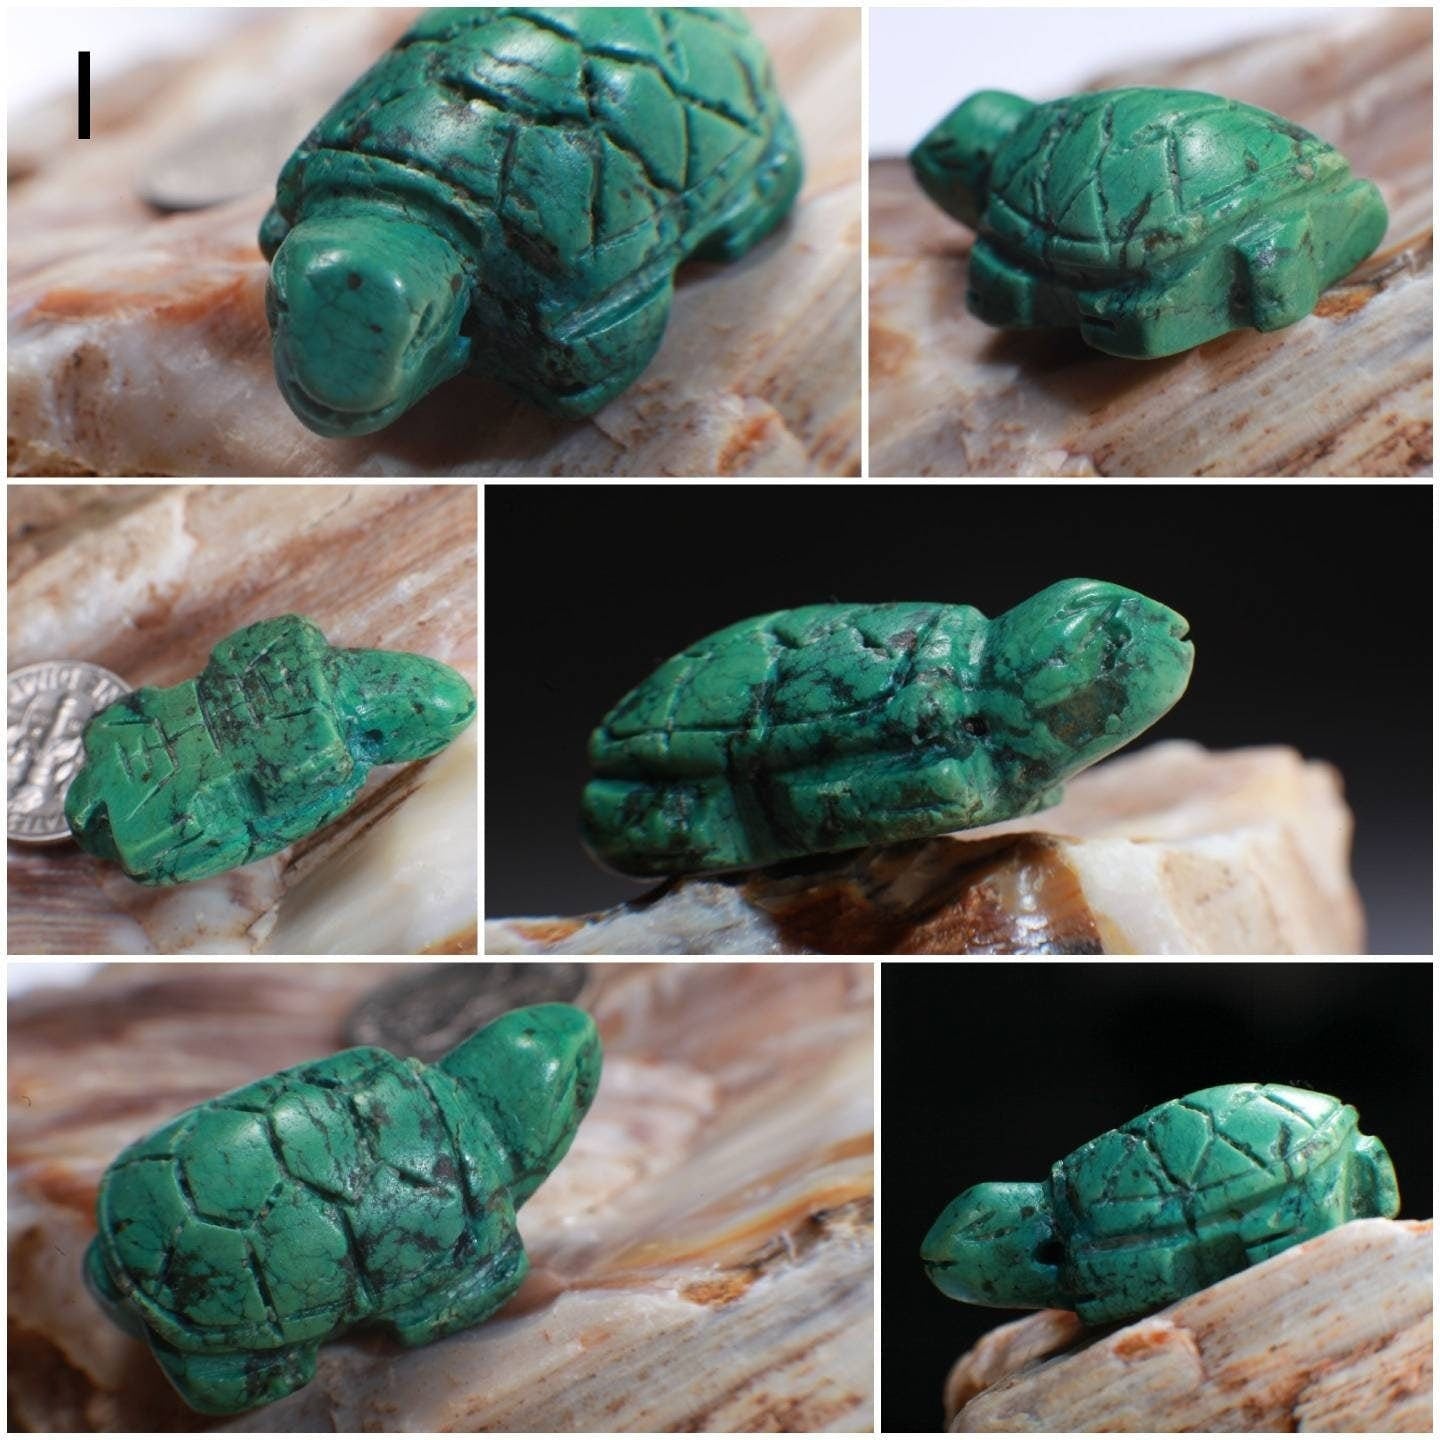 Hand Carved Natural Turquoise Sea Turtle Totem, Miniature Animals Collectible Figurines Vintage Sculpture, Old Stock